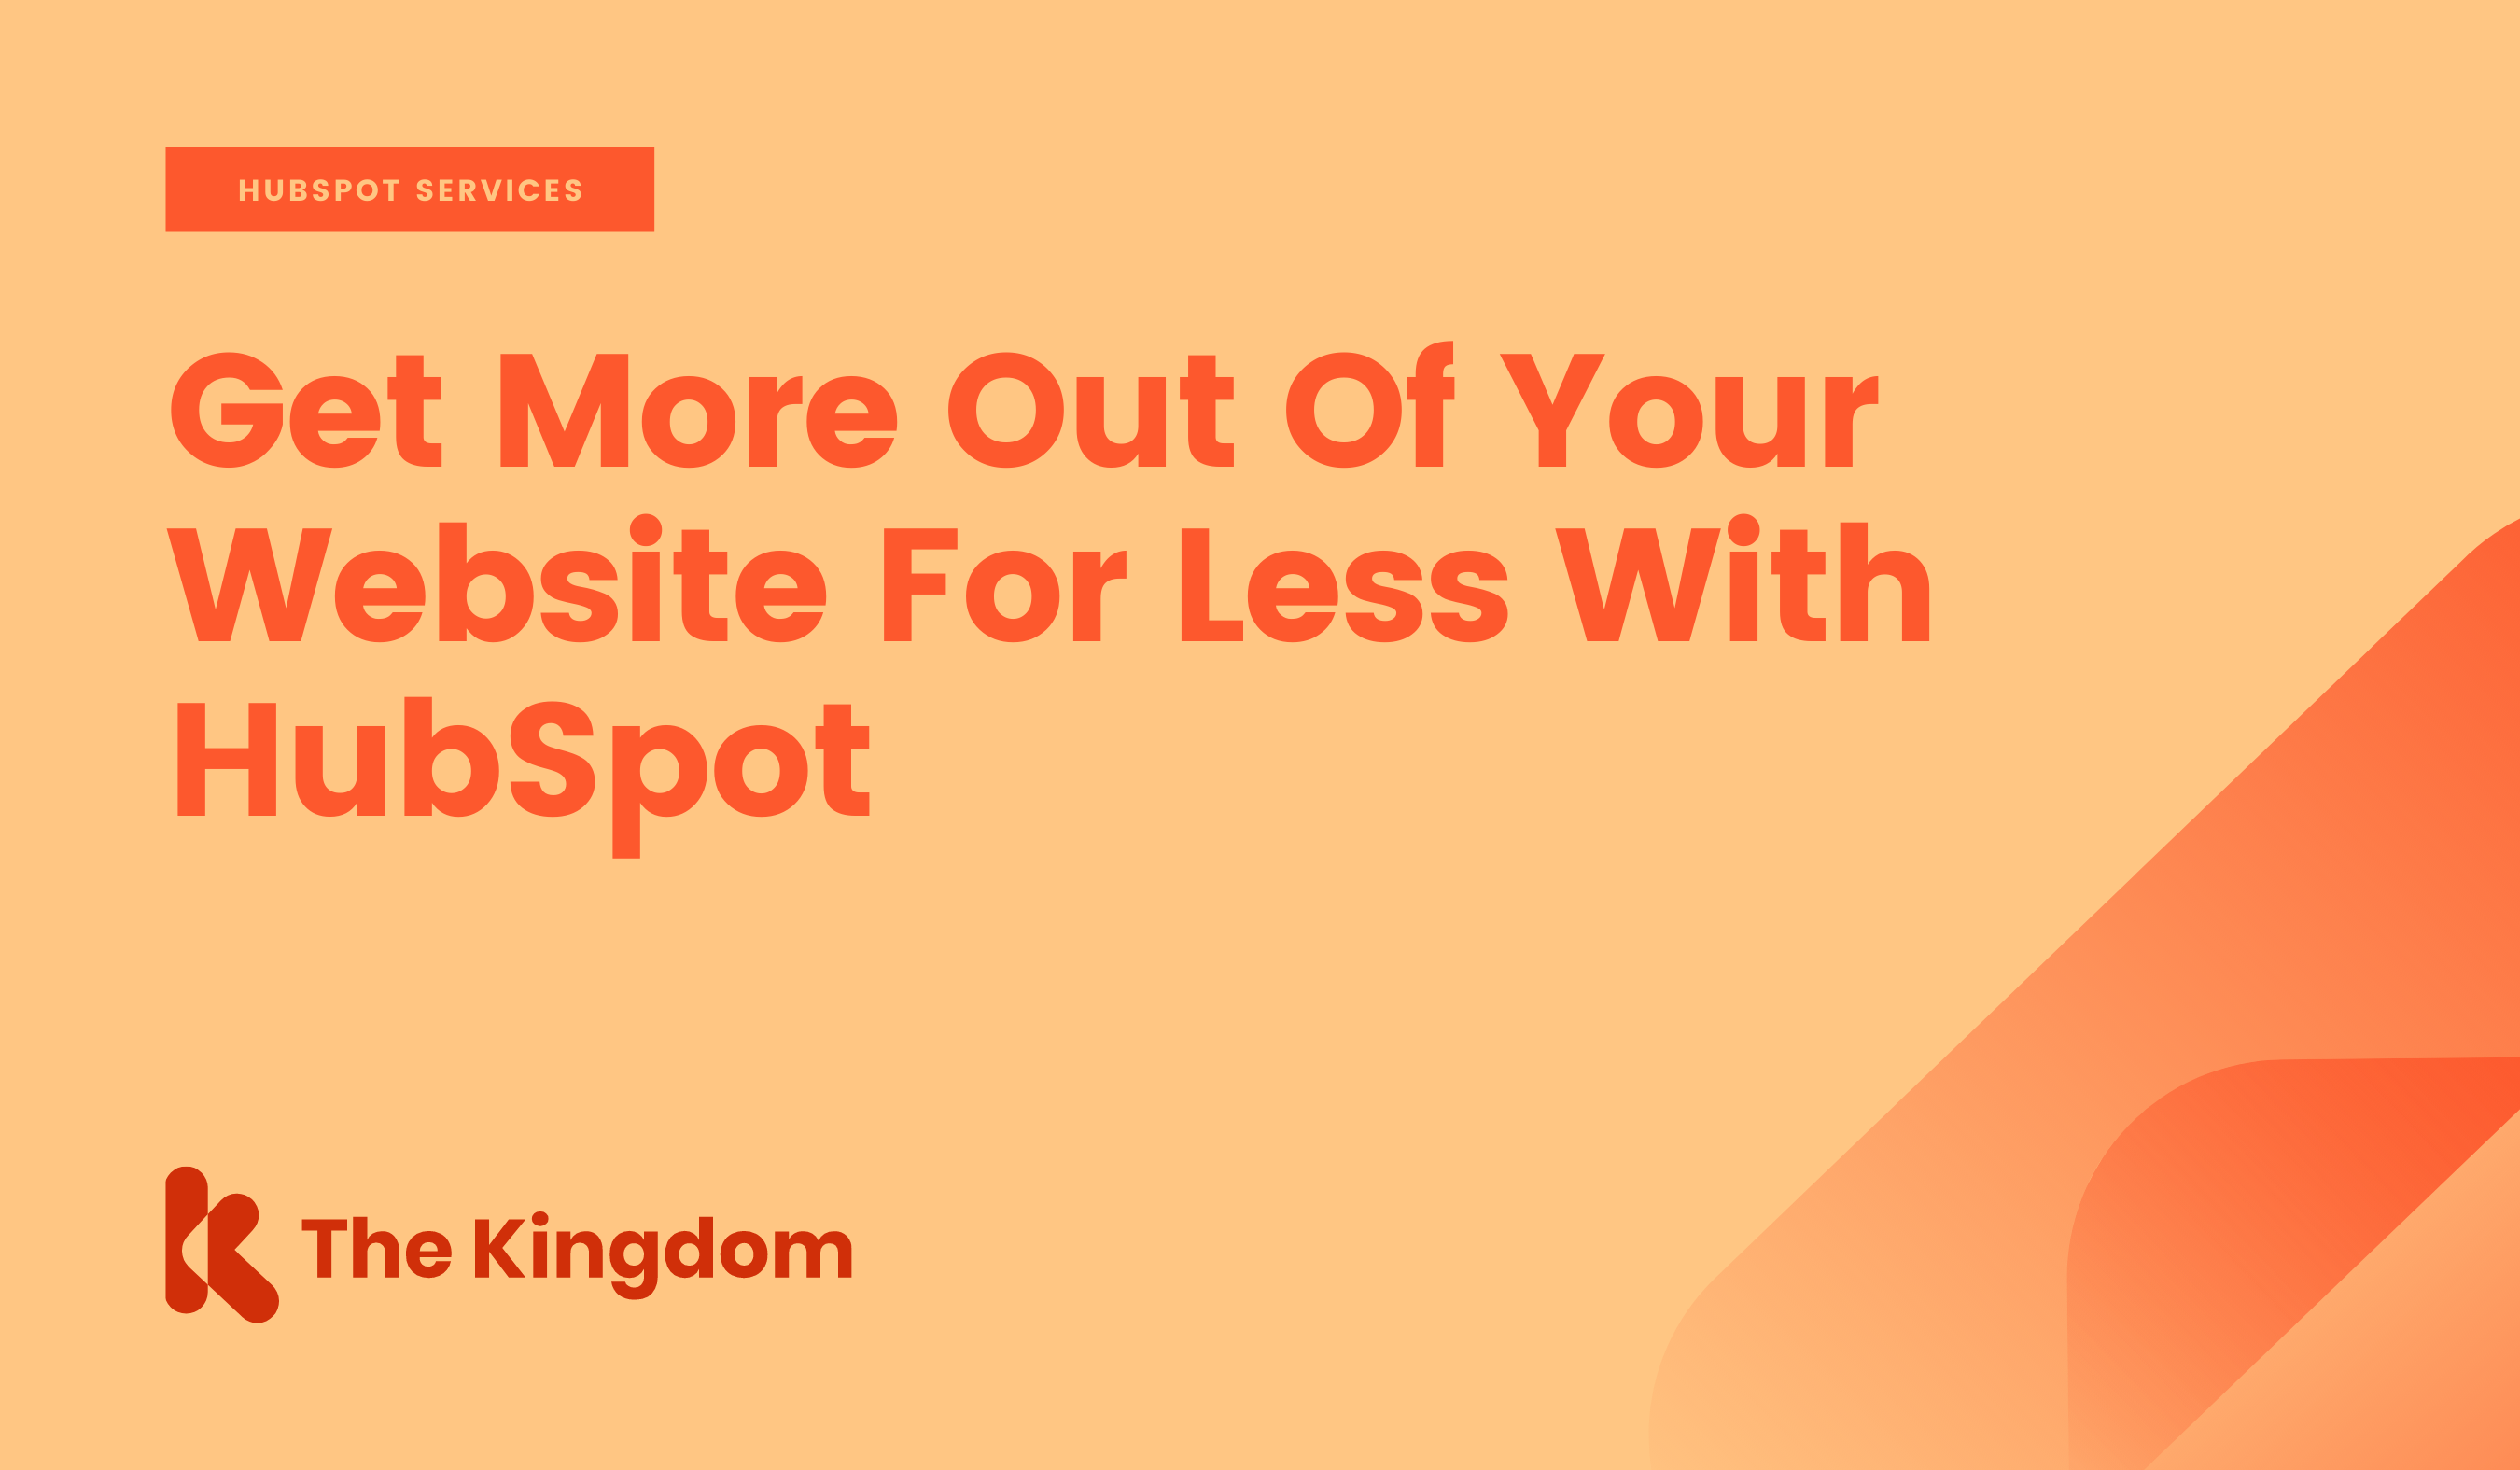 Get more out of your website for less with HubSpot.